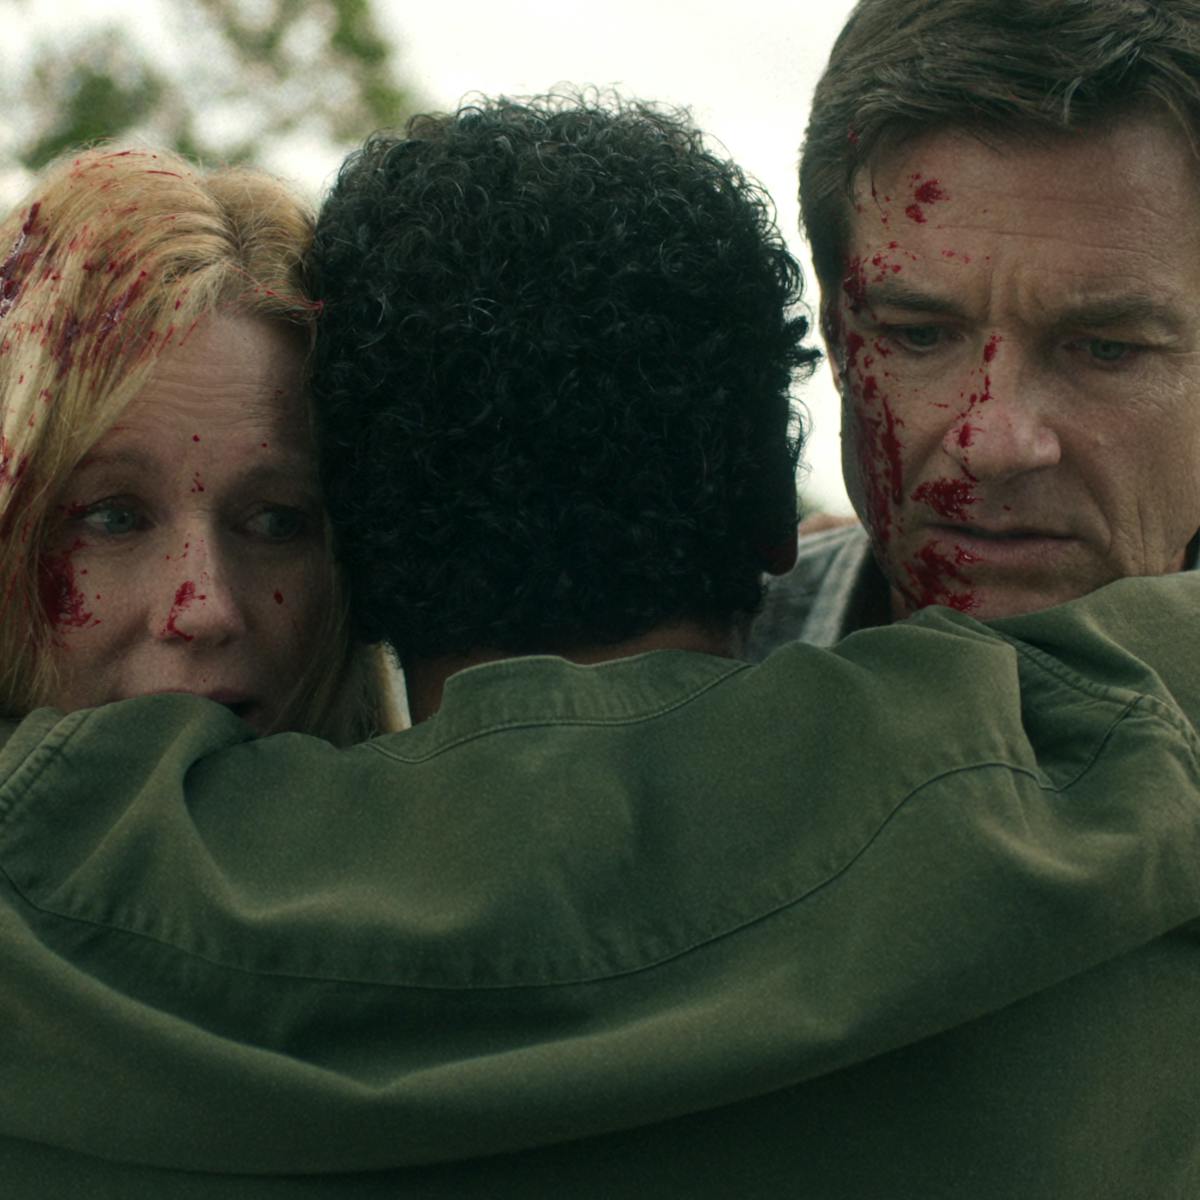 Laura Linney and Jason Bateman face the camera covered in blood.